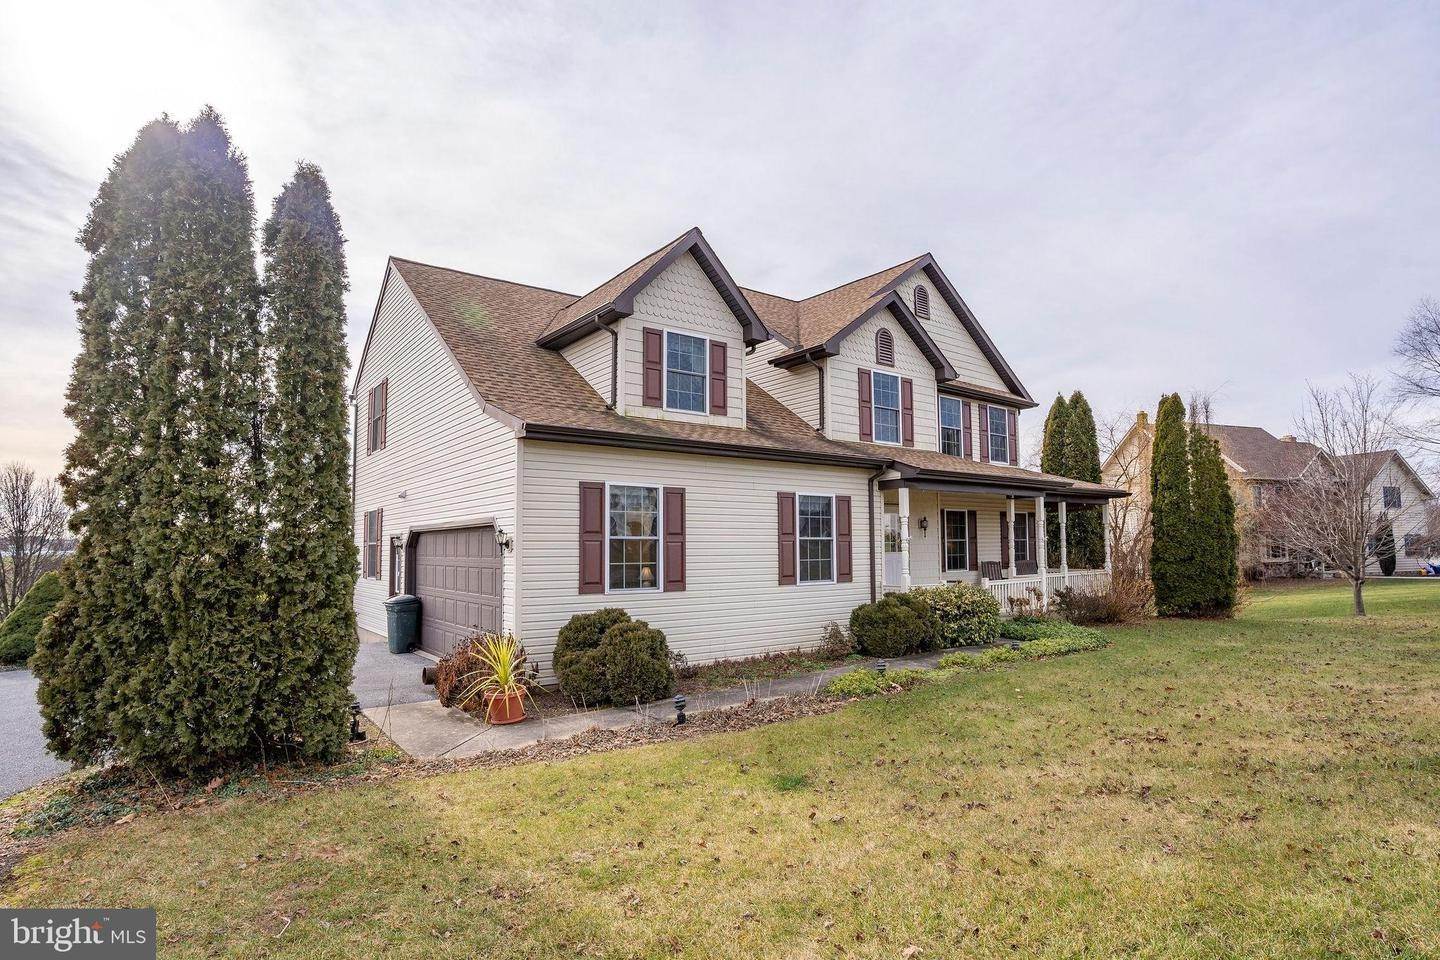 7. Residential for Sale at 108 COUNTRY Lane Richland, Pennsylvania 17087 United States